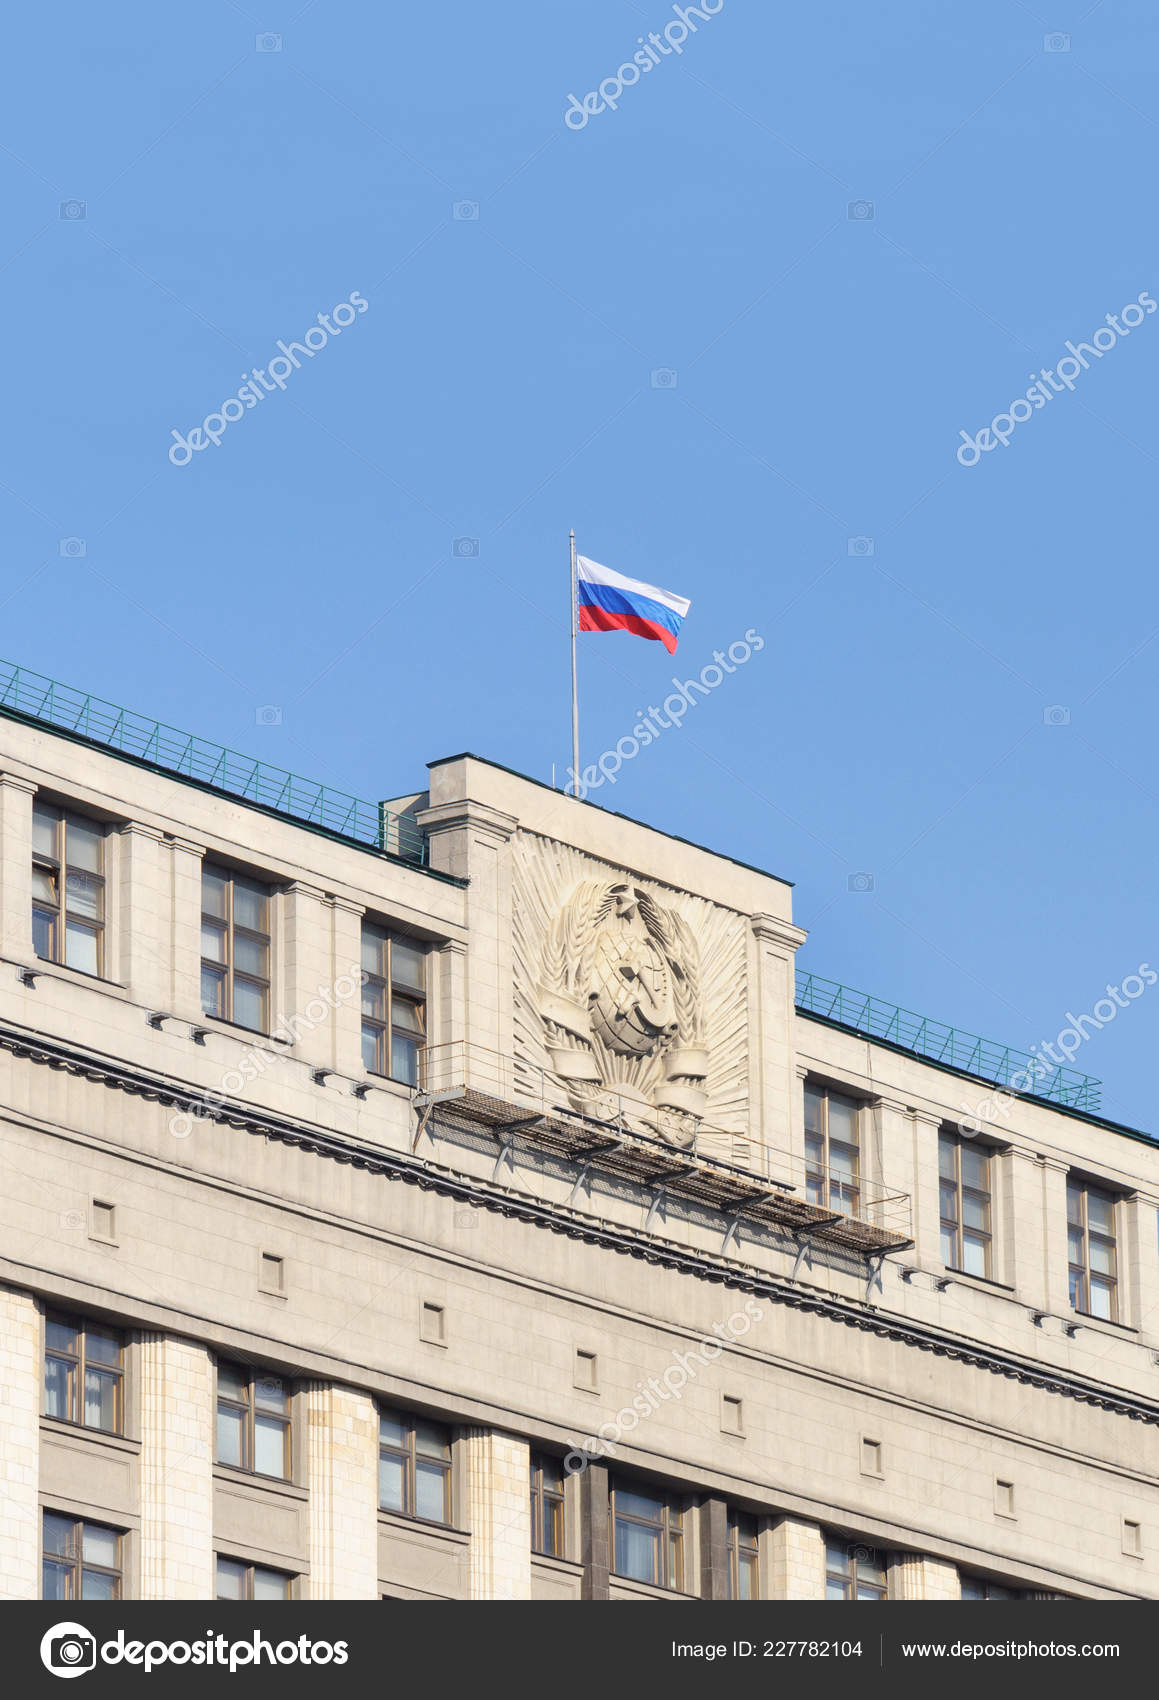 National flag of Russia Coat of Arms